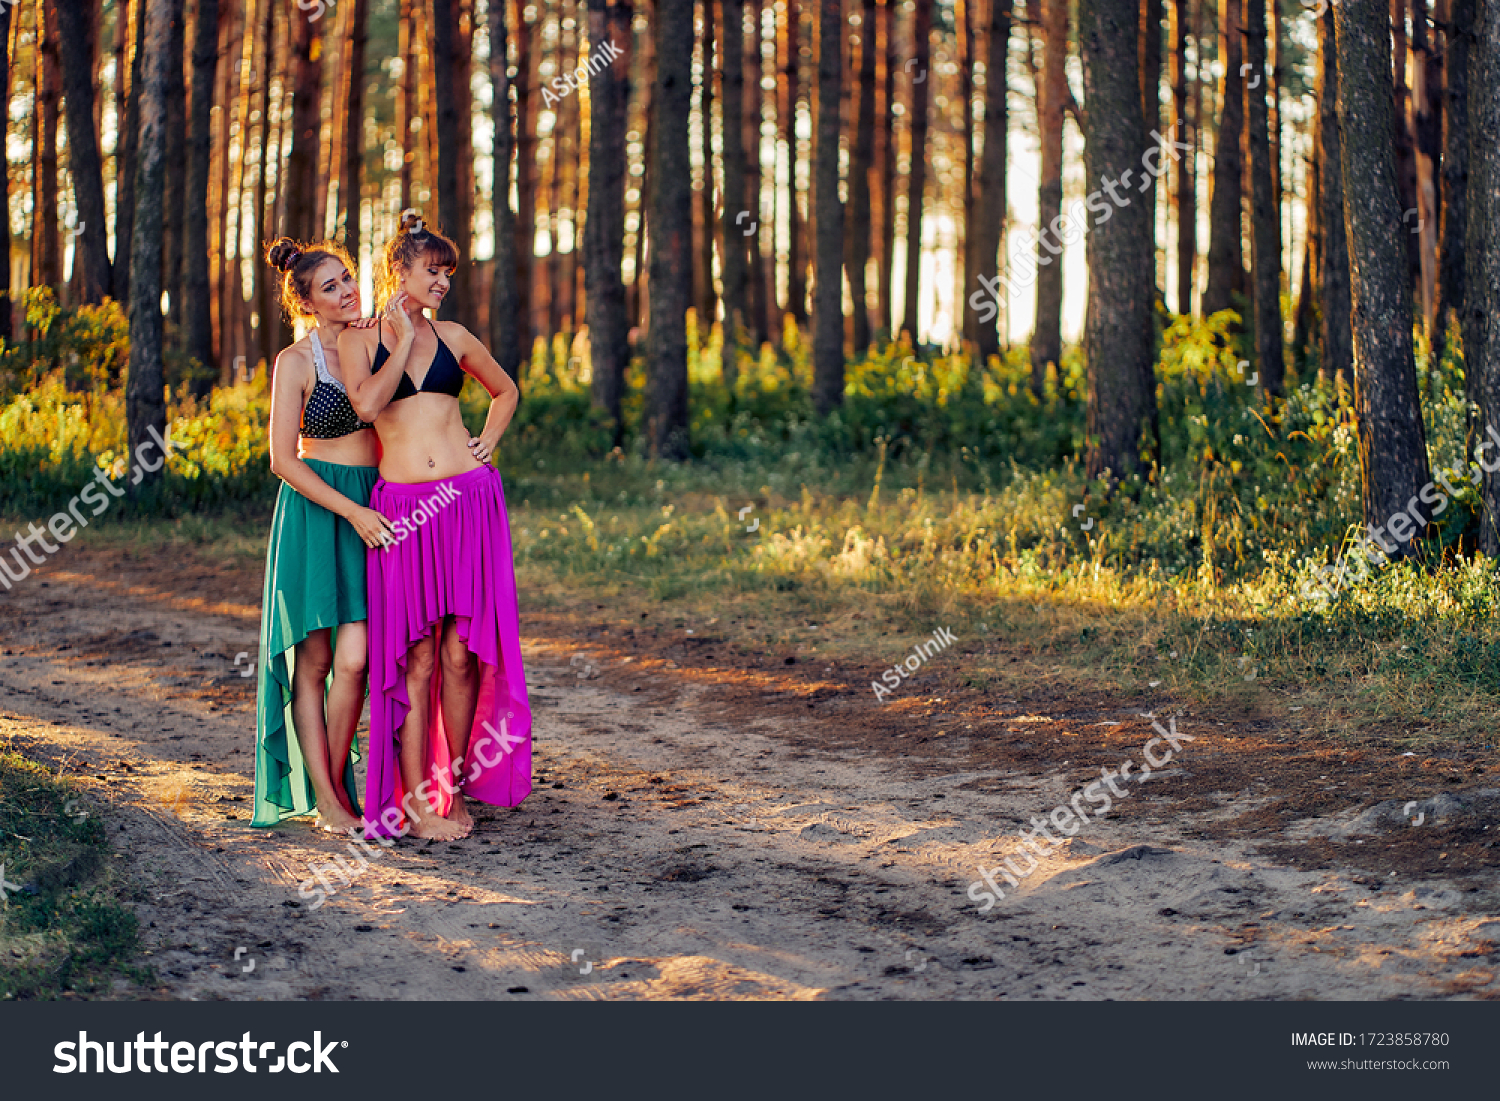 https://image.shutterstock.com/z/stock-photo-two-girls-in-bathing-suits-and-long-dresses-in-the-forest-at-sunset-1723858780.jpg